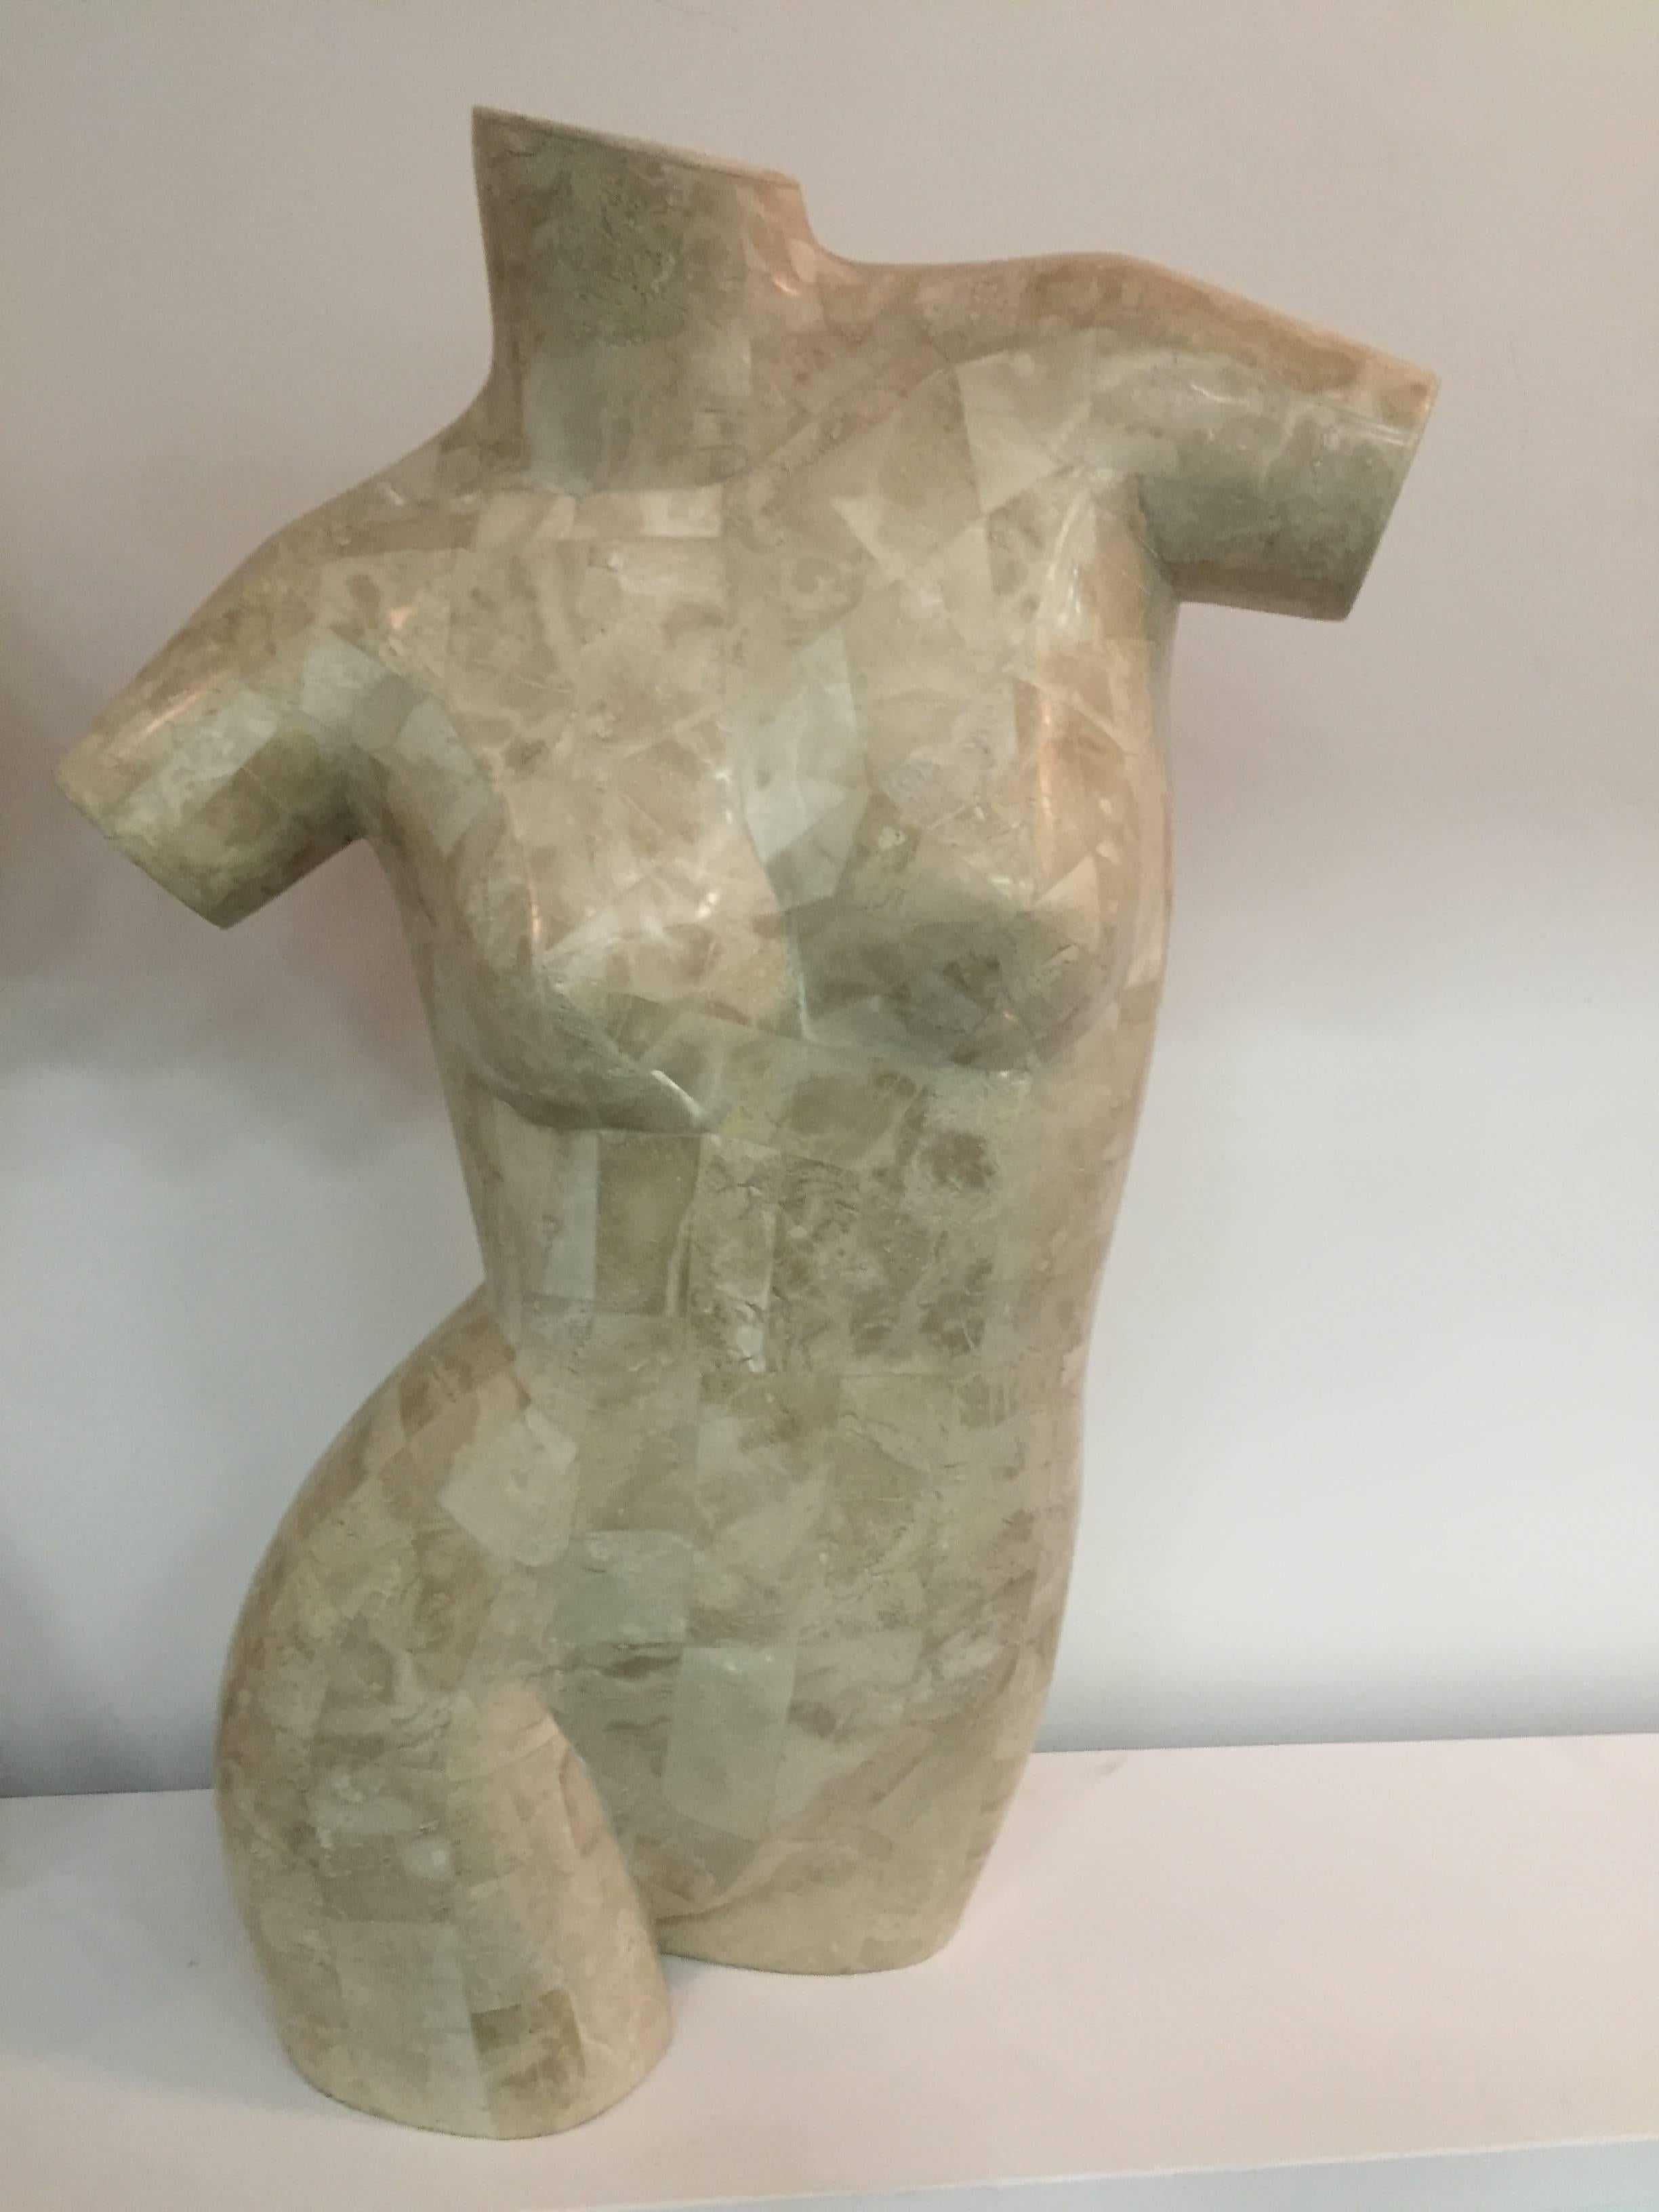 A sculptural male and female torso made of tessellated marble by Maitland-Smith. 

Female: 28 H x 18 W x 8 D.
Male: 30 H x 22 W x 12 D.